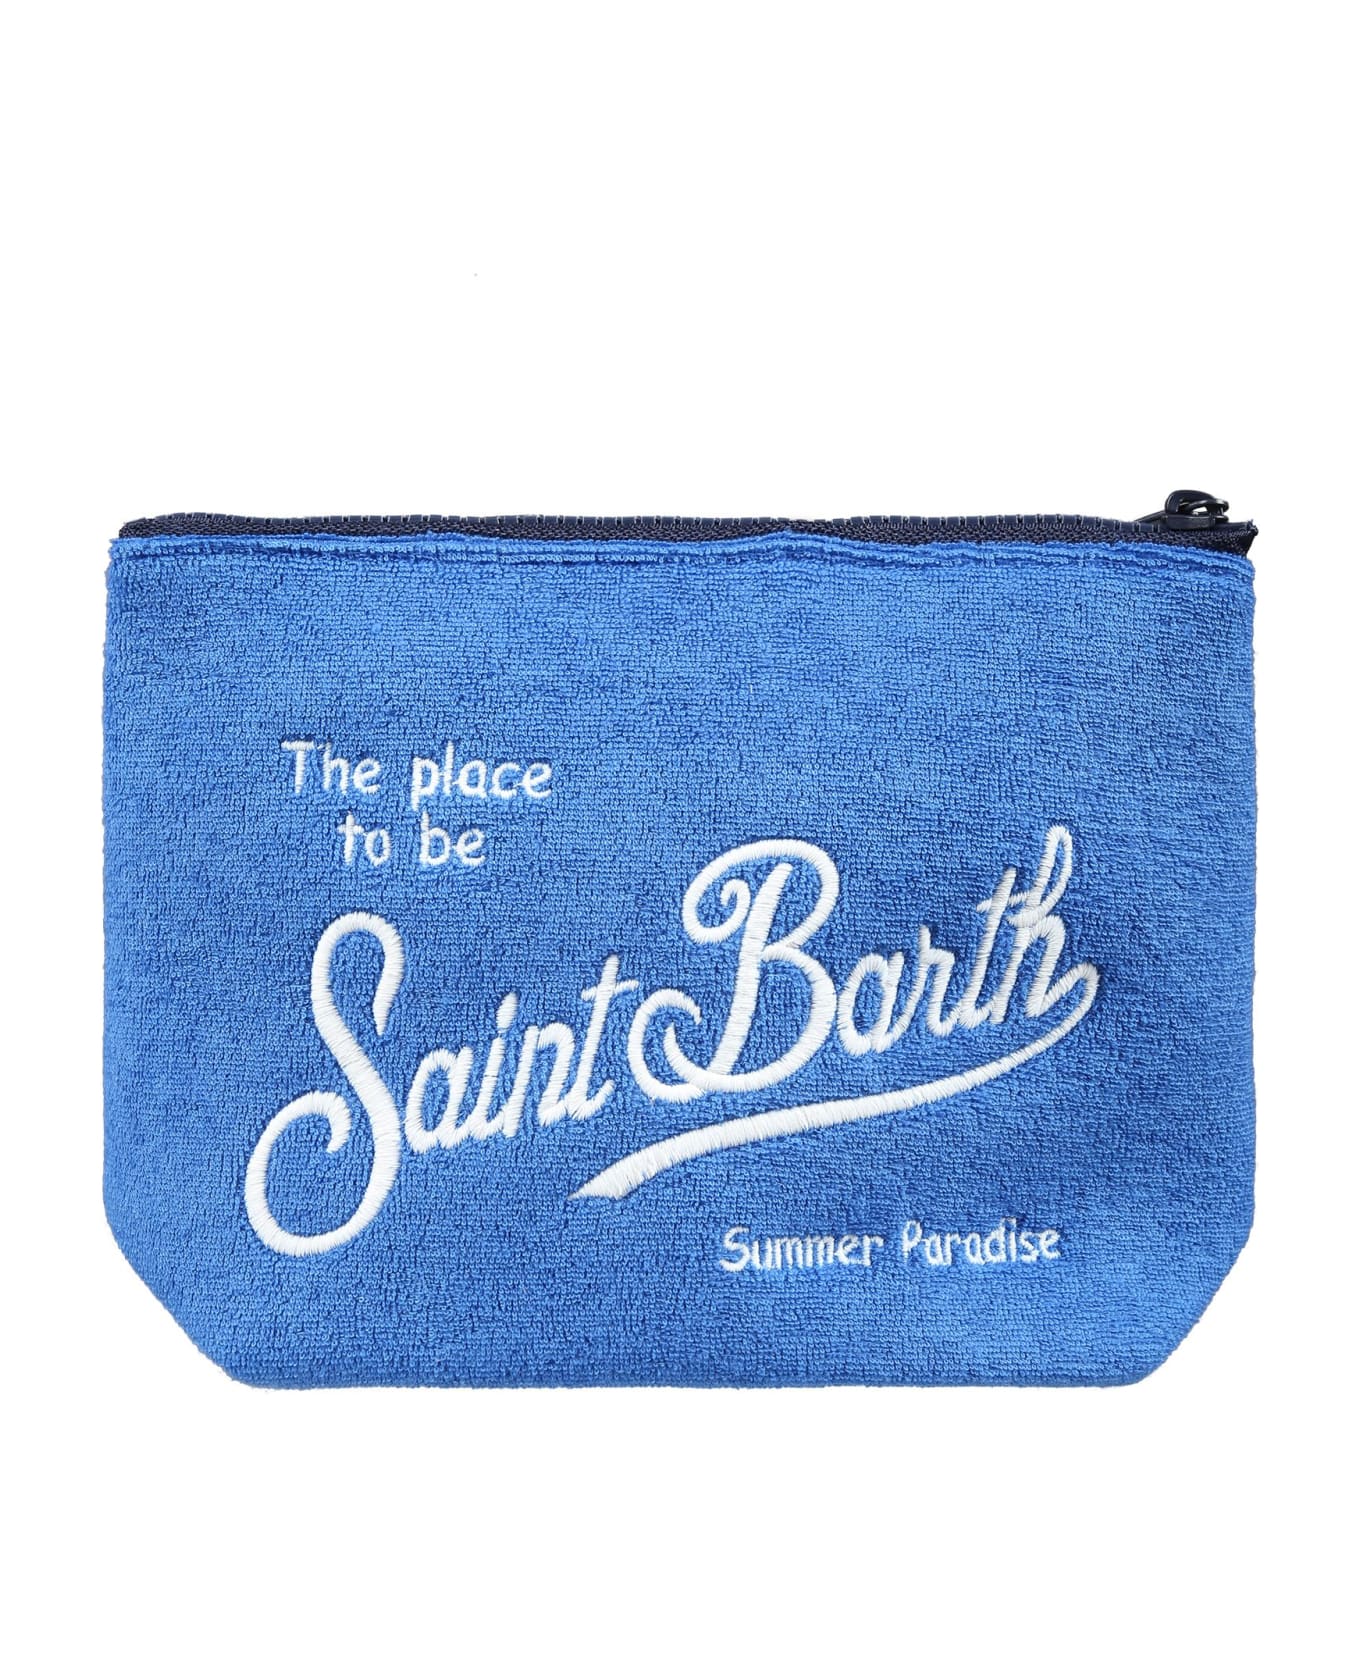 MC2 Saint Barth Light Blue Cluch Bag For Kids With Logo - Light Blue アクセサリー＆ギフト